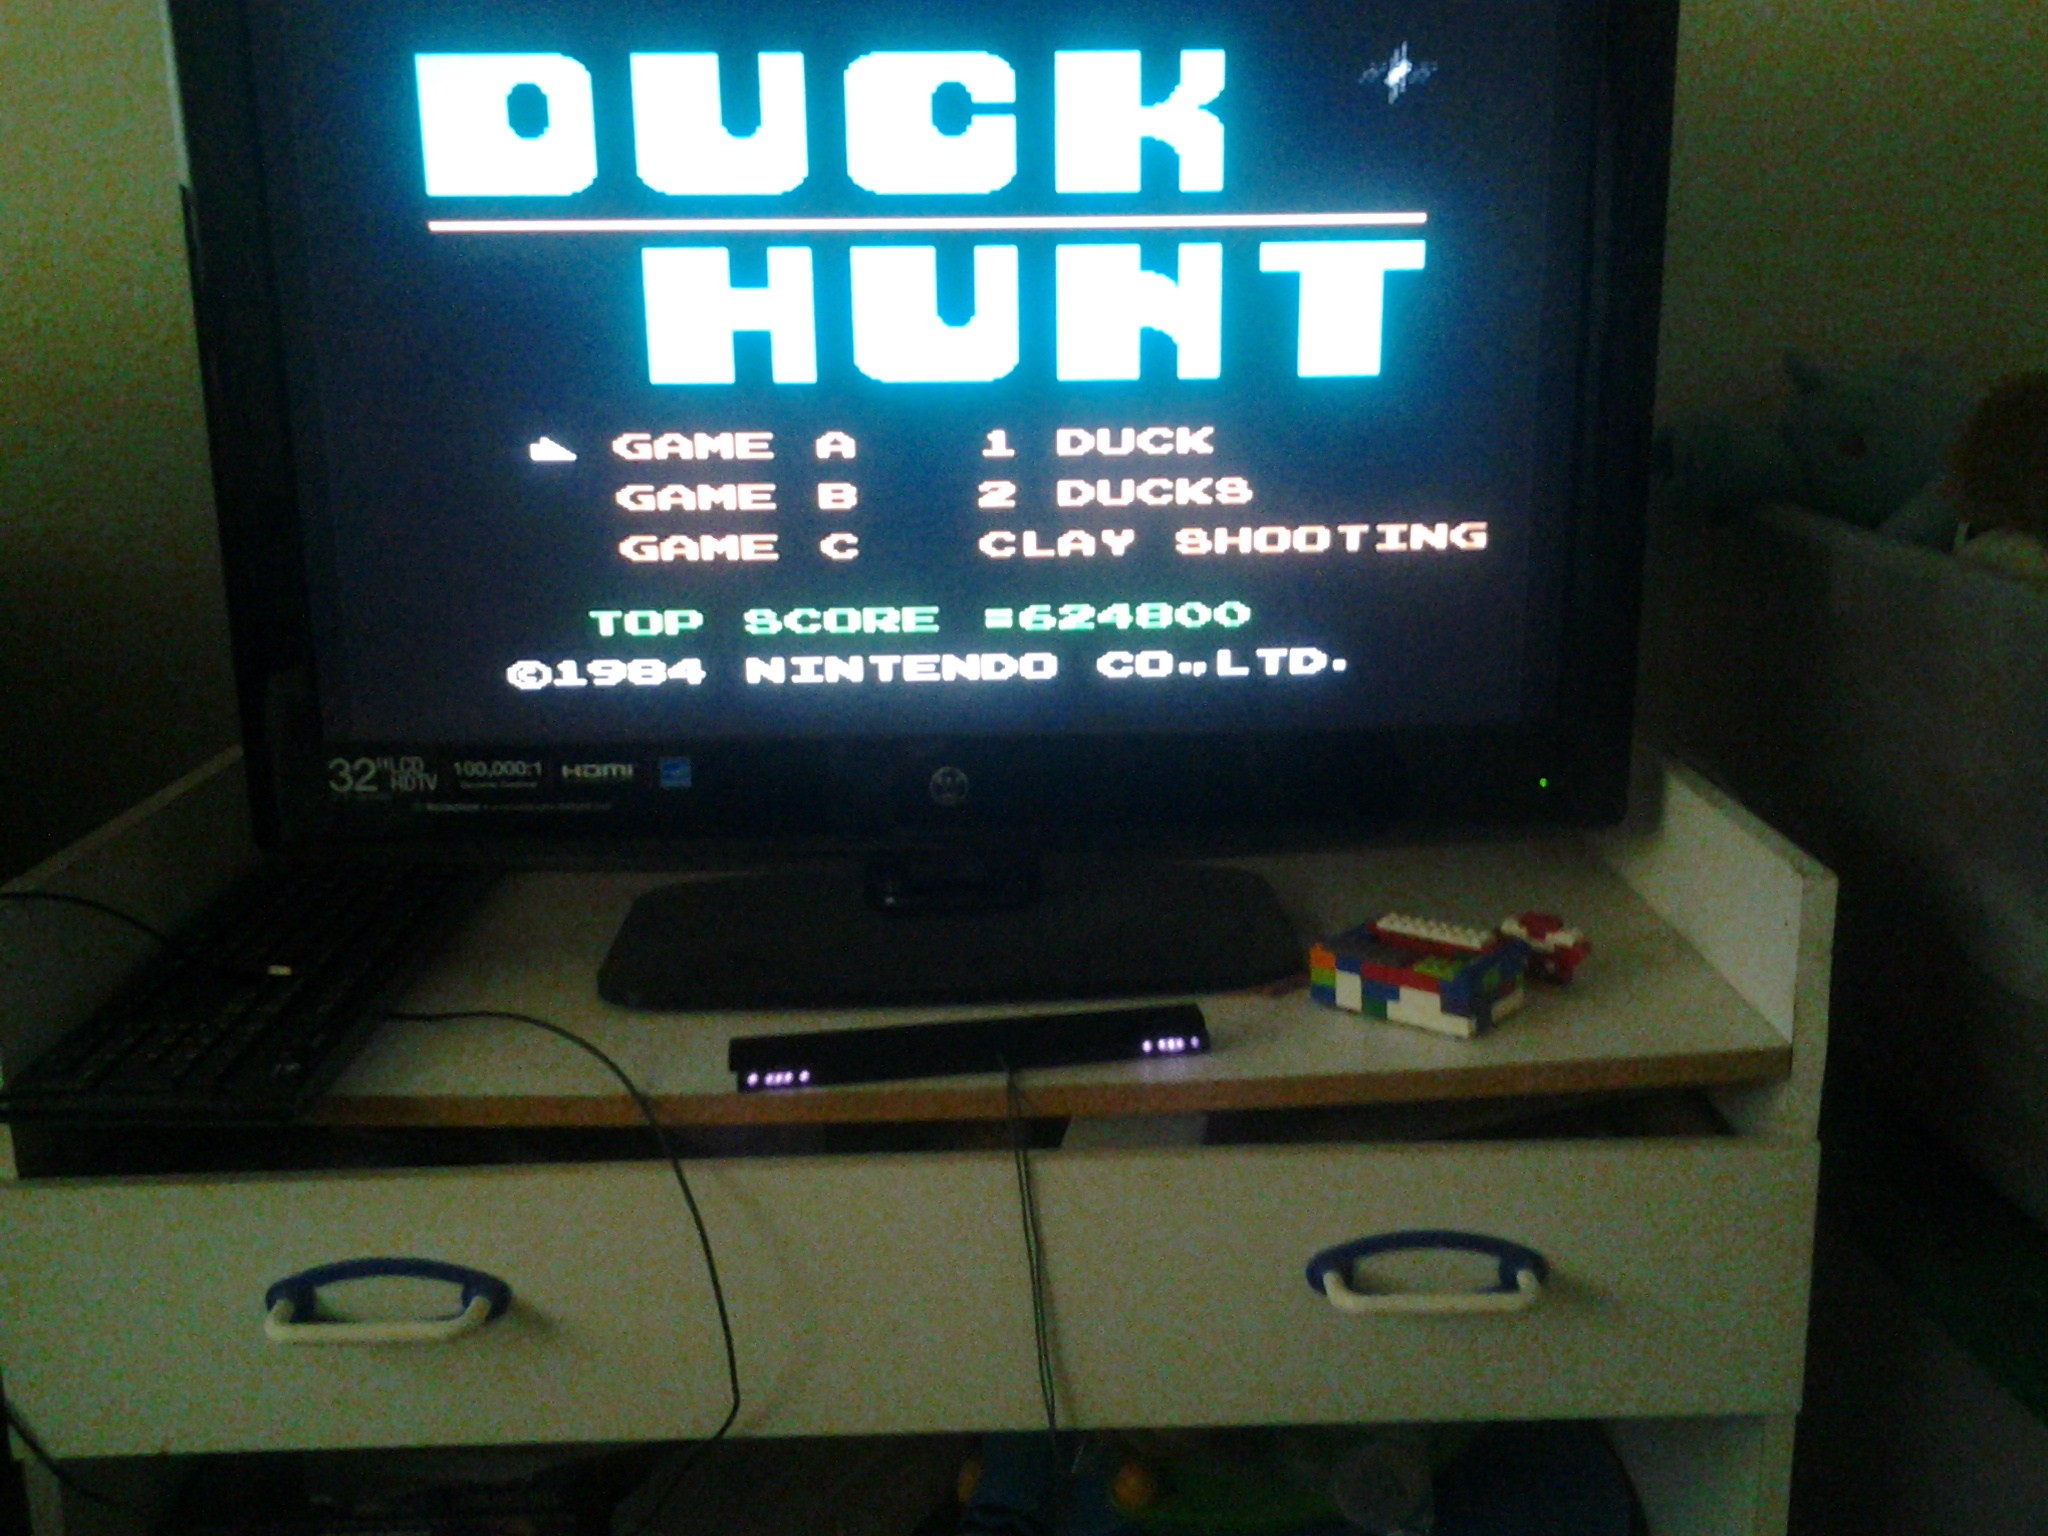 MatthewFelix: Duck Hunt: One Duck [Any Distance] (NES/Famicom Emulated) 624,800 points on 2014-04-26 14:11:44